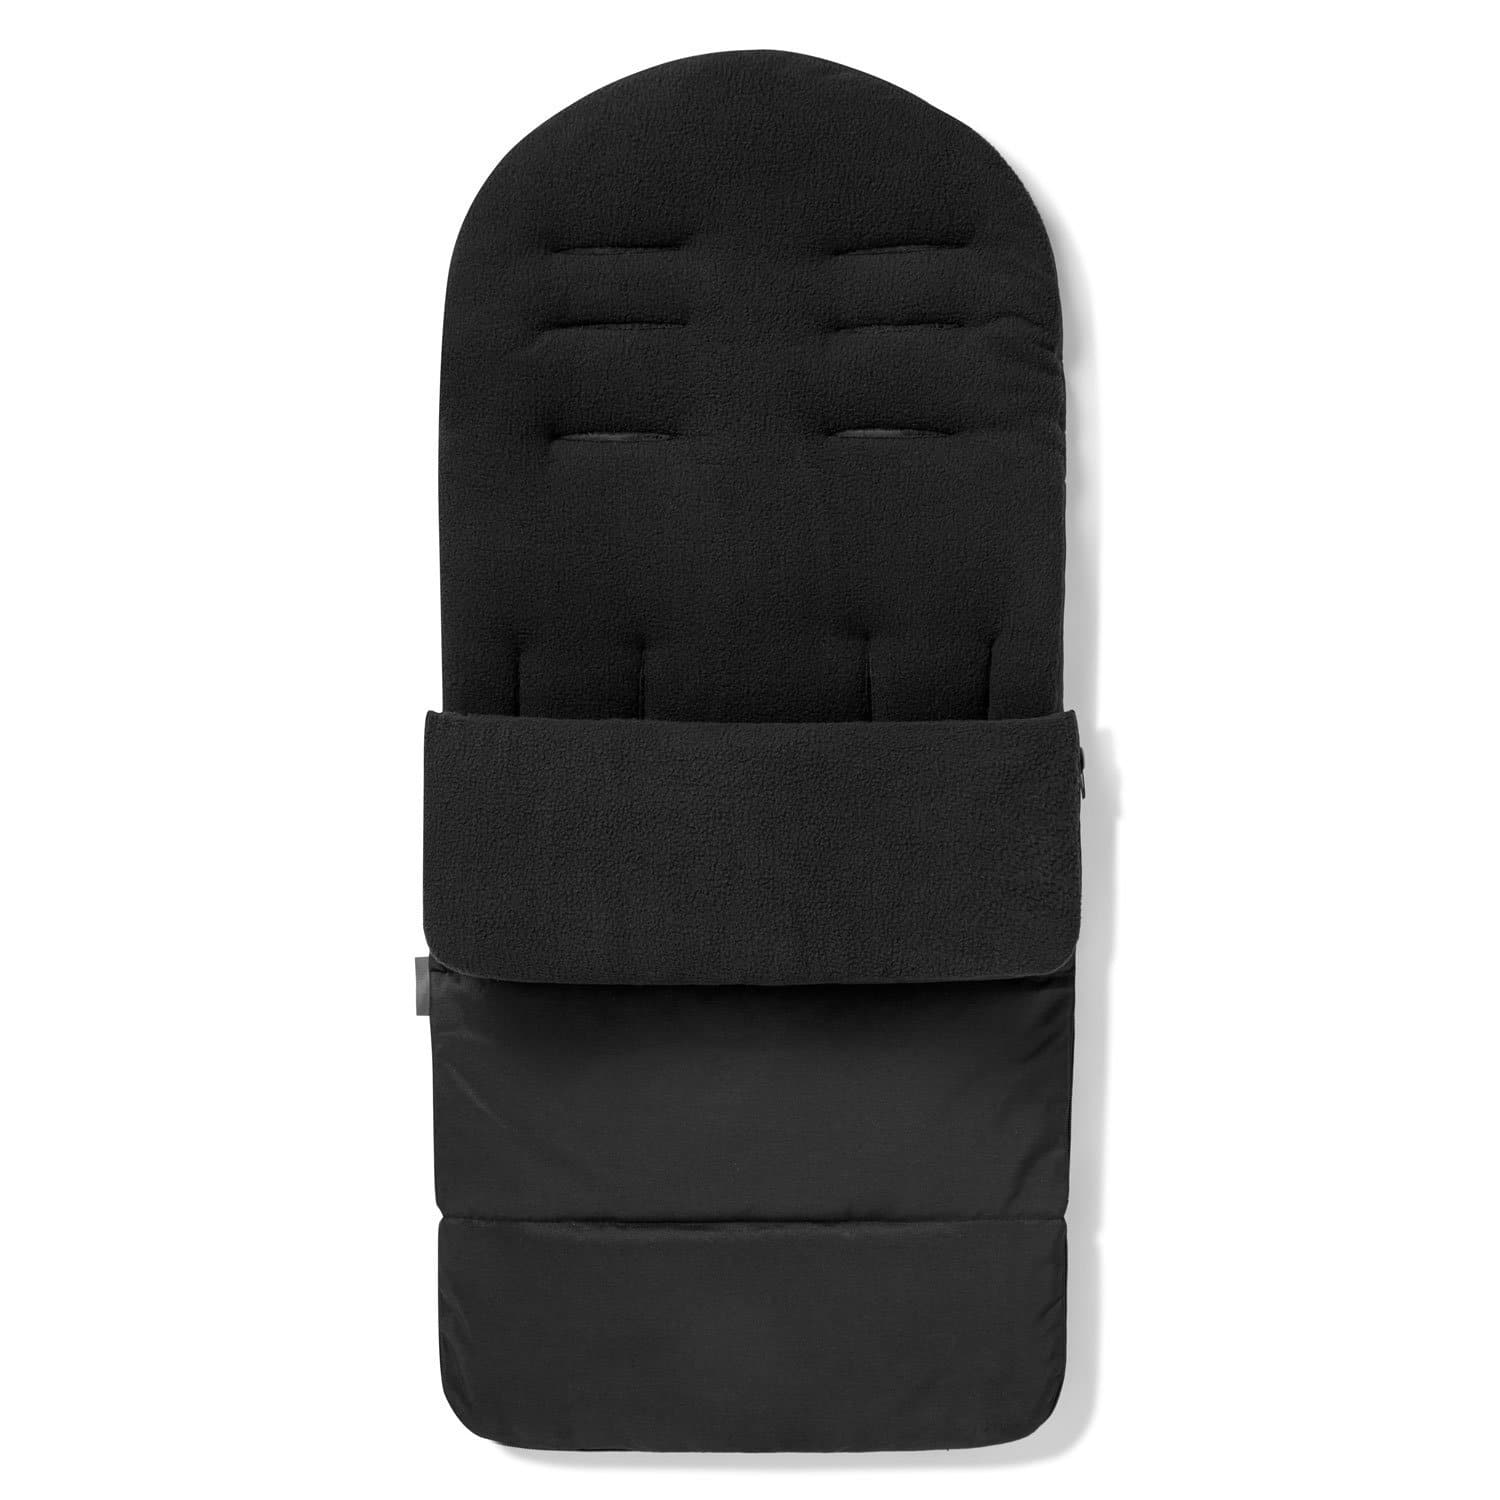 Premium Footmuff / Cosy Toes Compatible with Baby Jogger - Black Jack / Fits All Models | For Your Little One